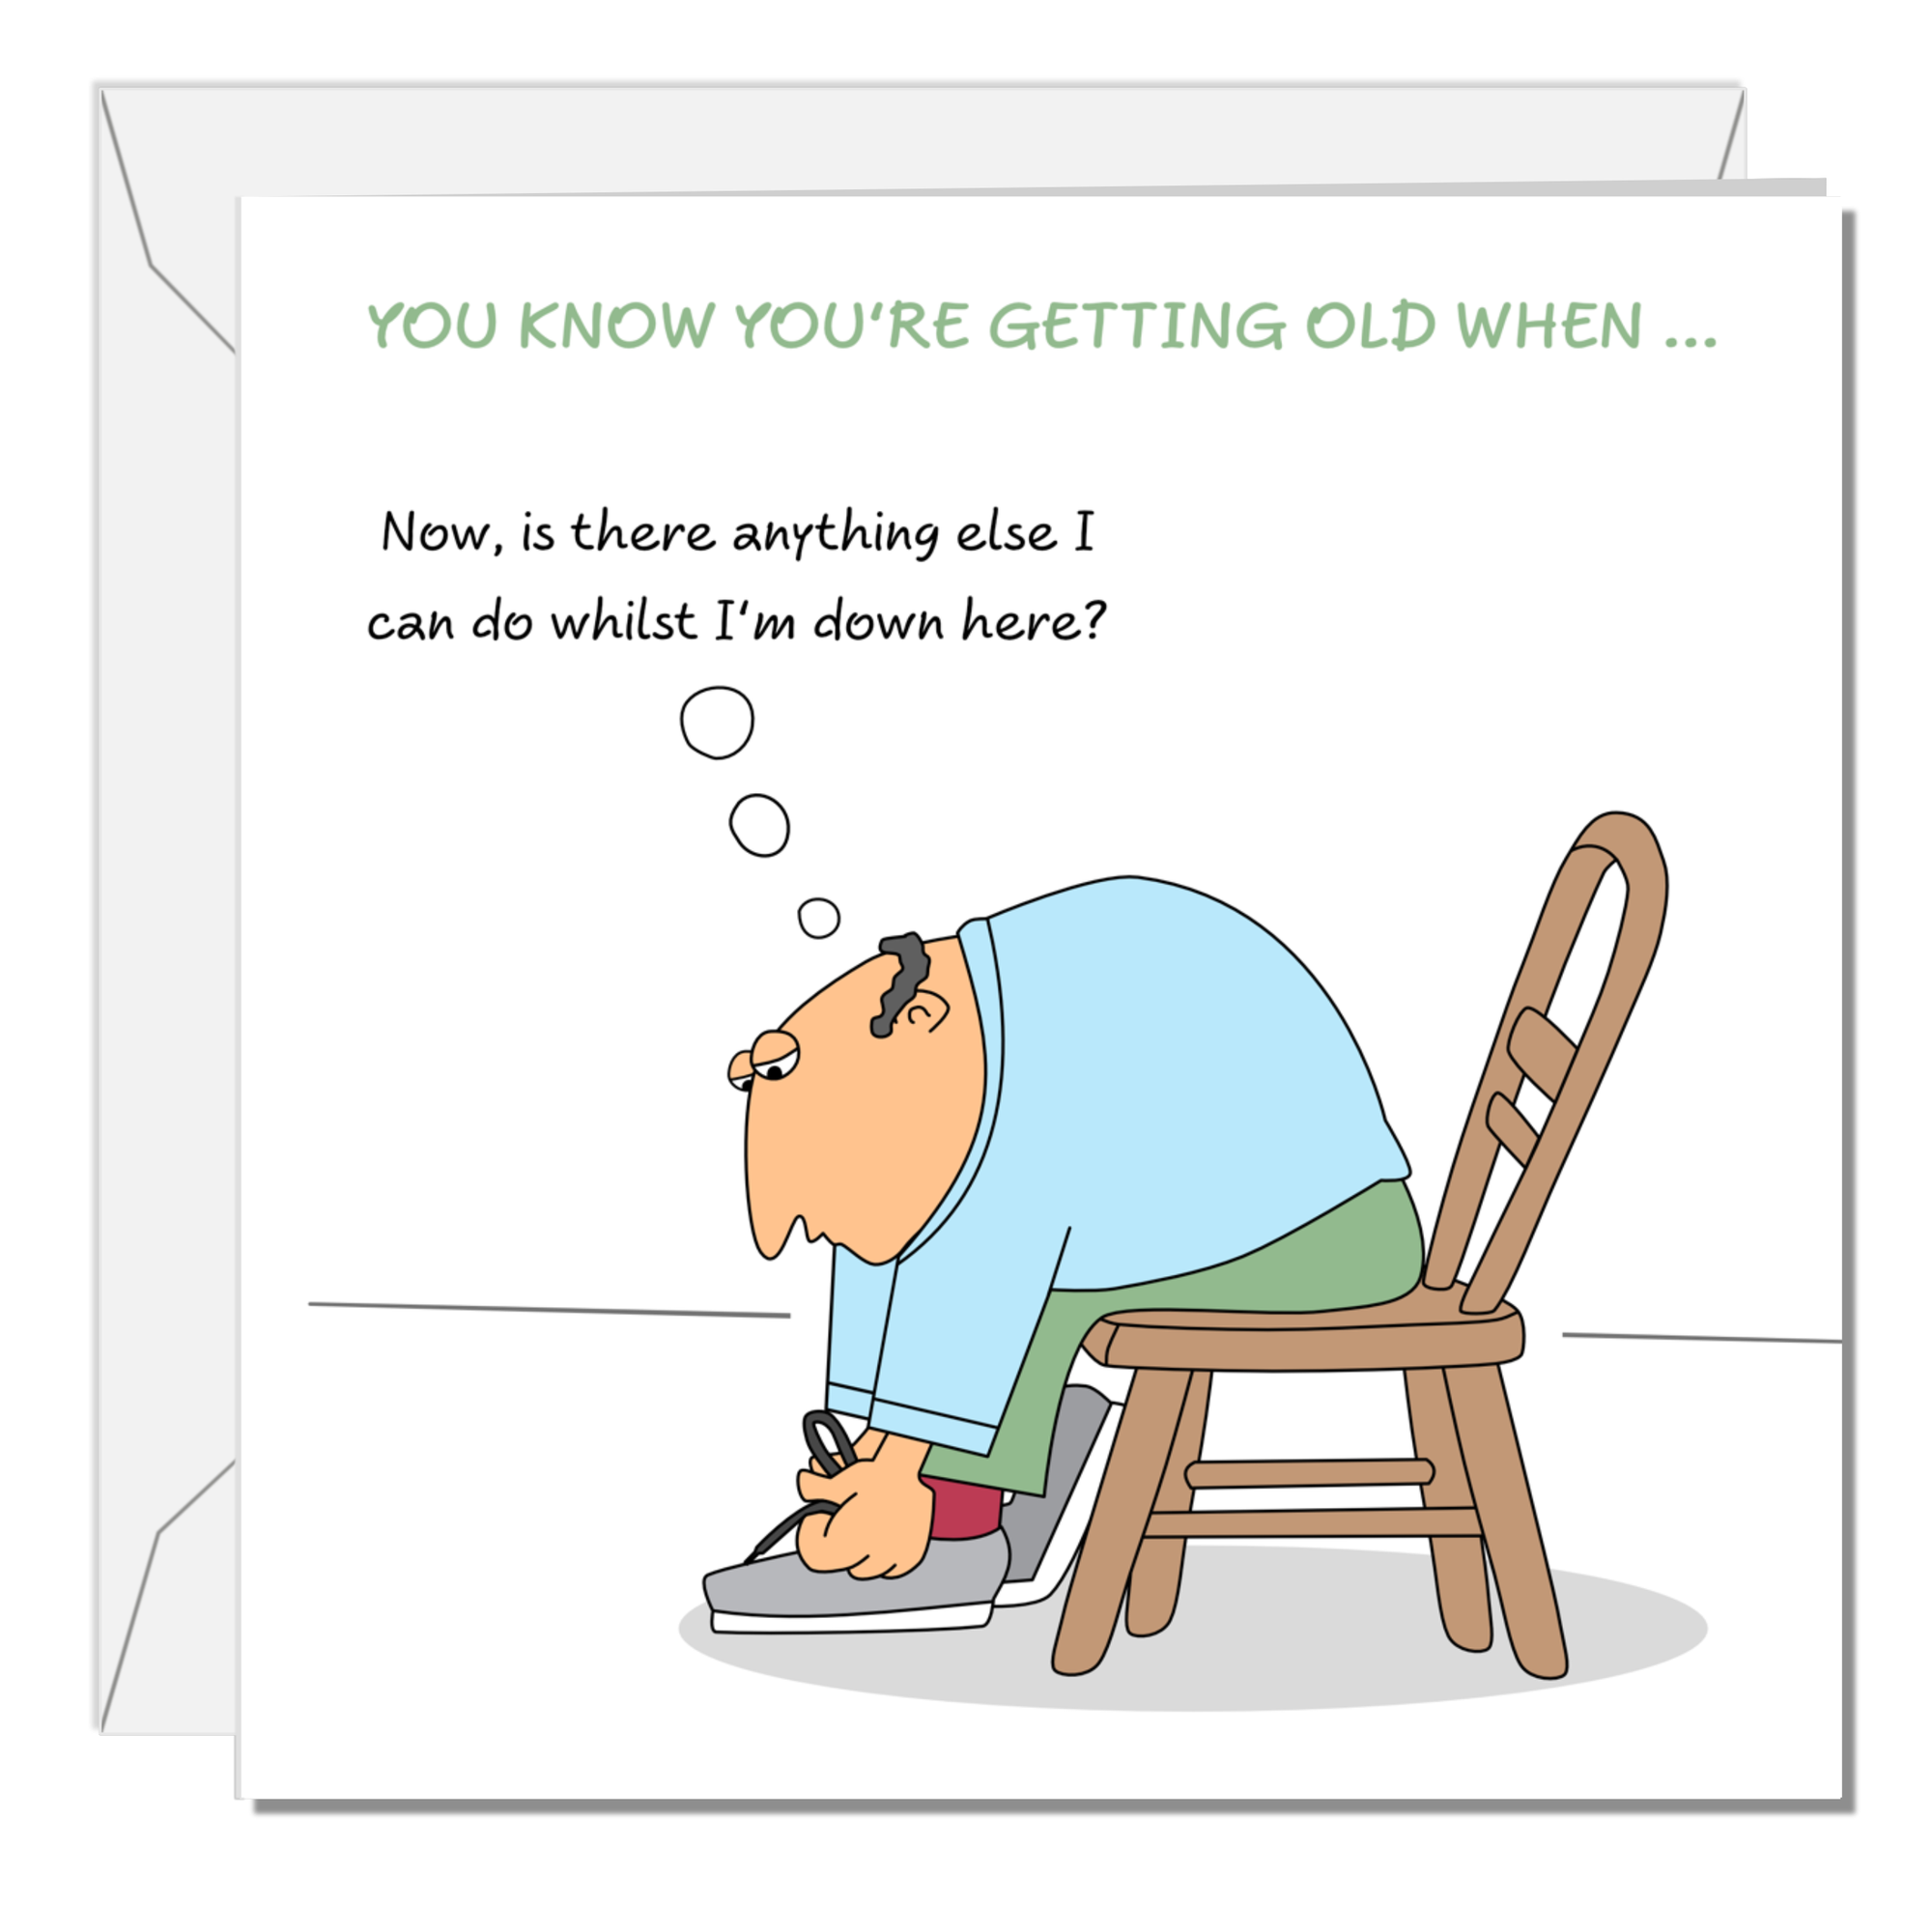 Funny Birthday Card for Male 50th 60th 70th Husband Father Dad Uncle Brother Son Man Friend Old Aged Age Humorous Fun Creaky Grey